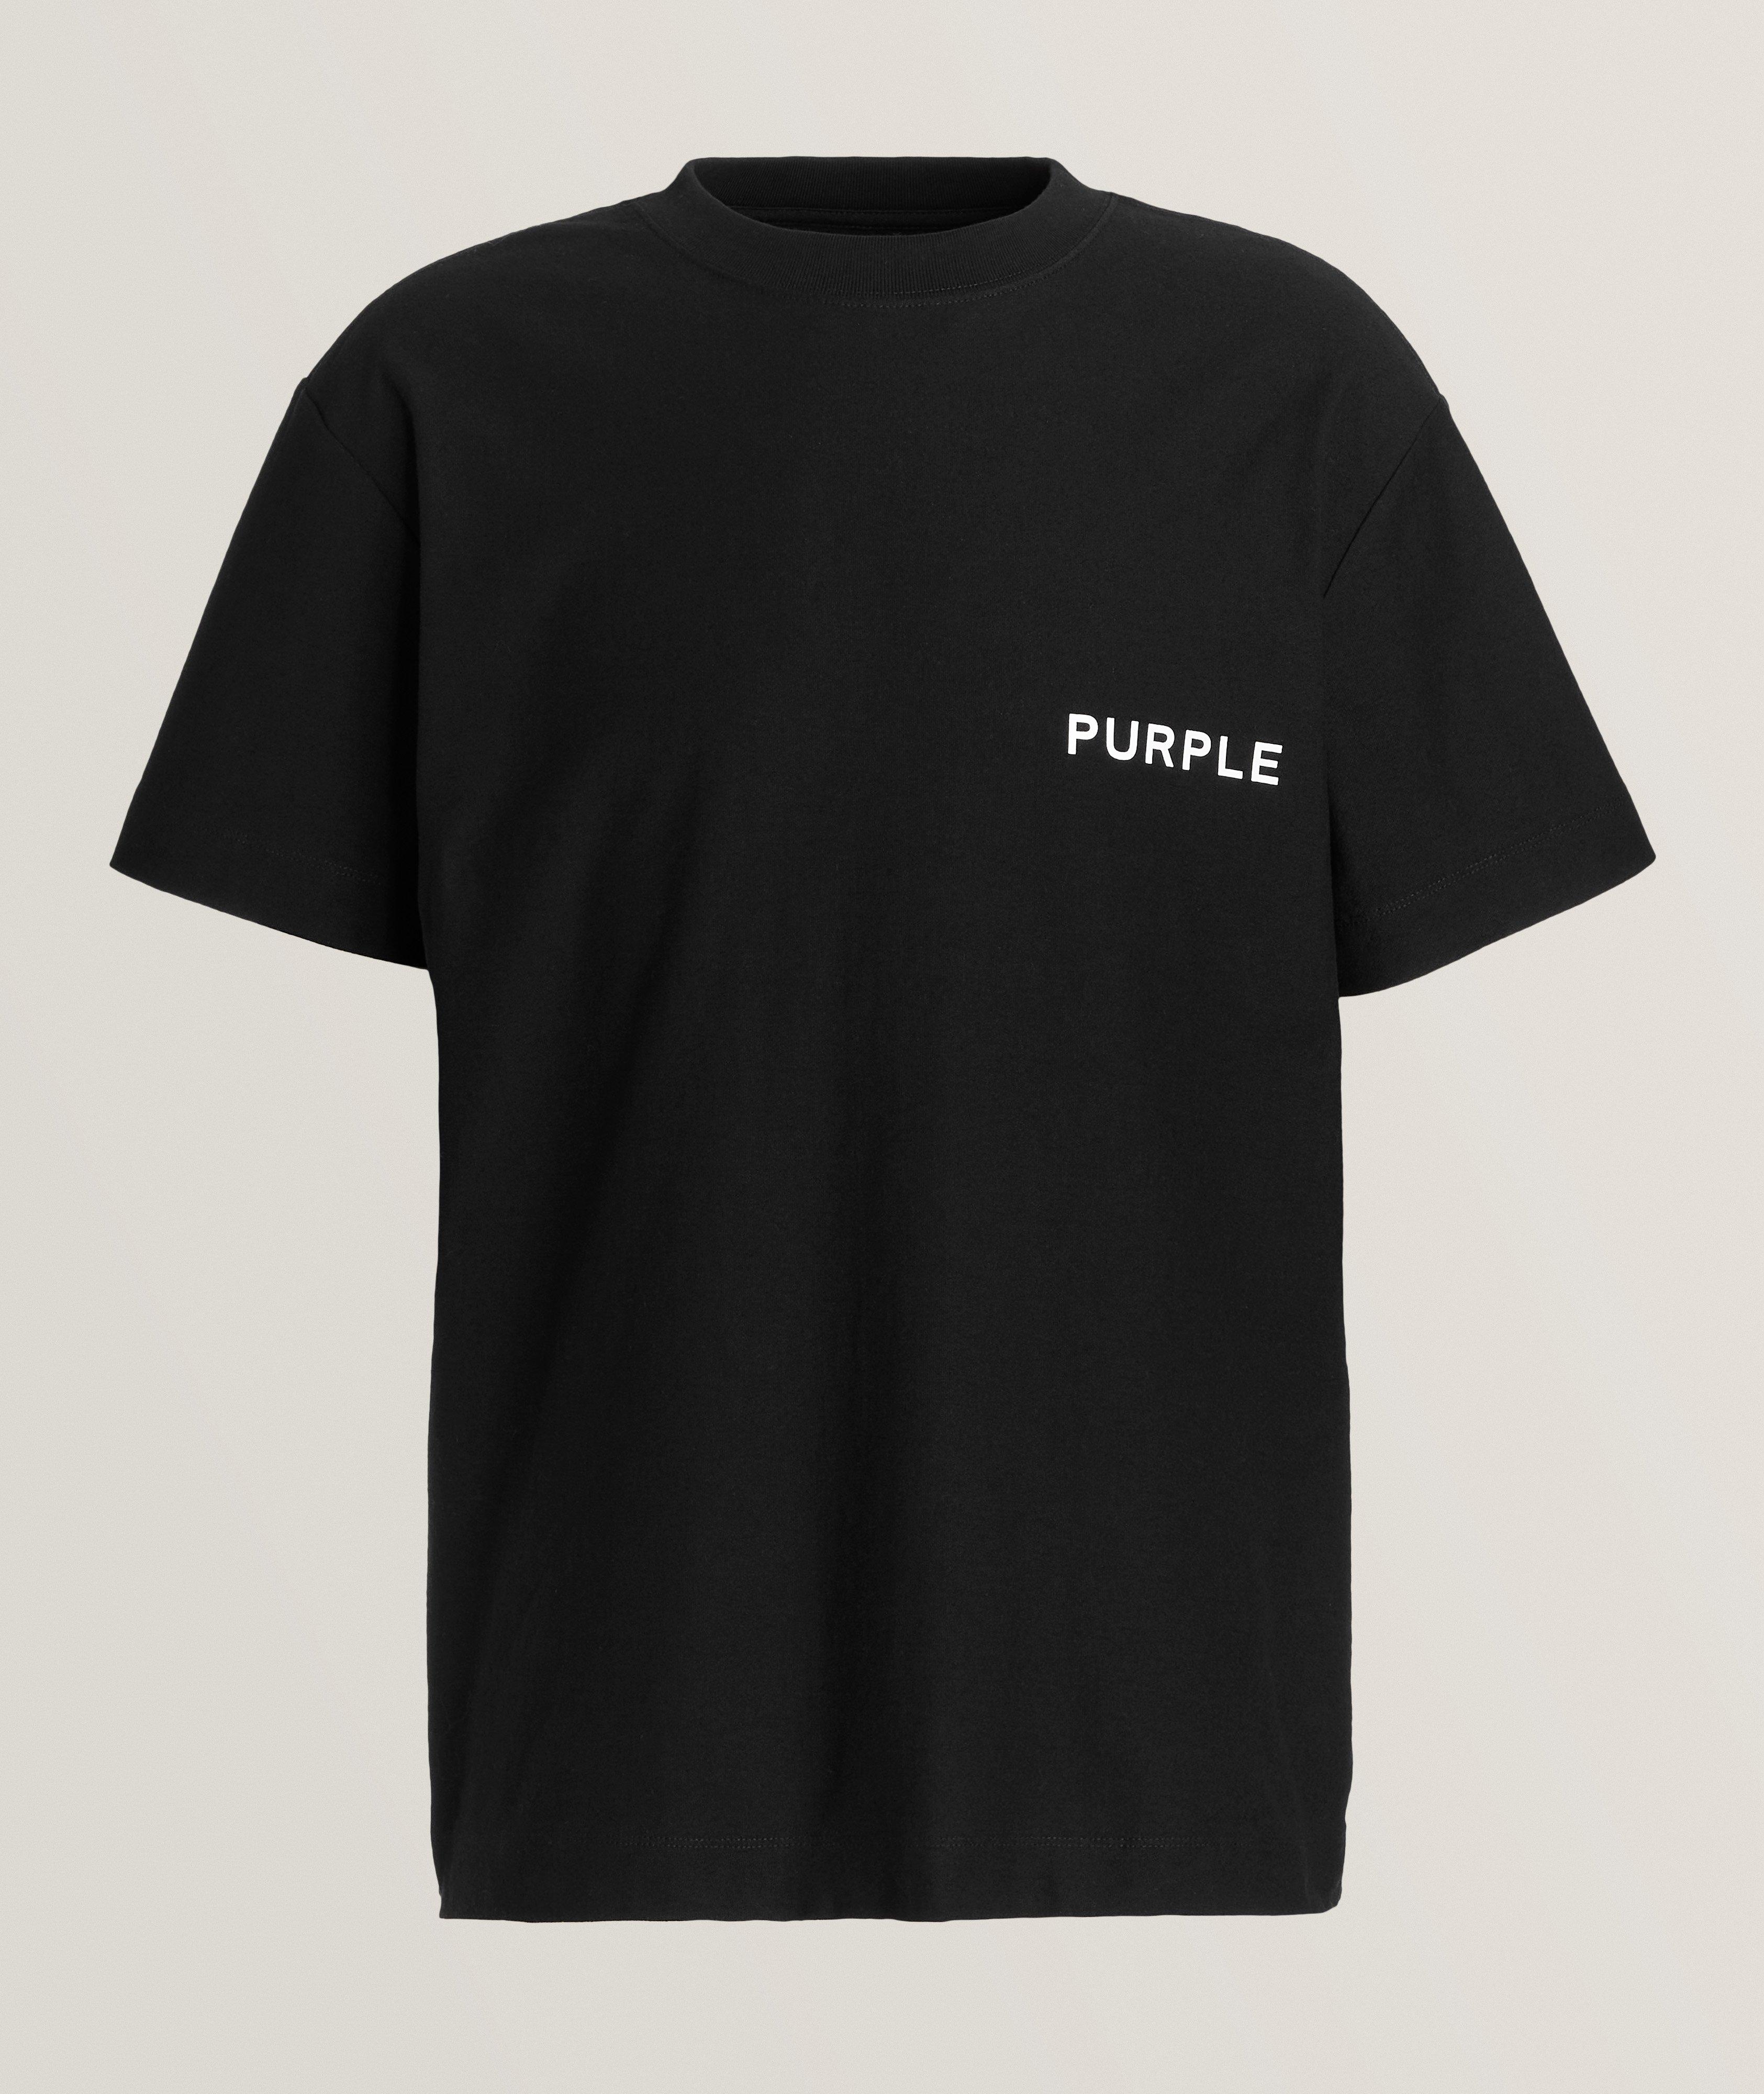 New arrivals🚨🚨🚨 @purple_brand black label is in store. Very